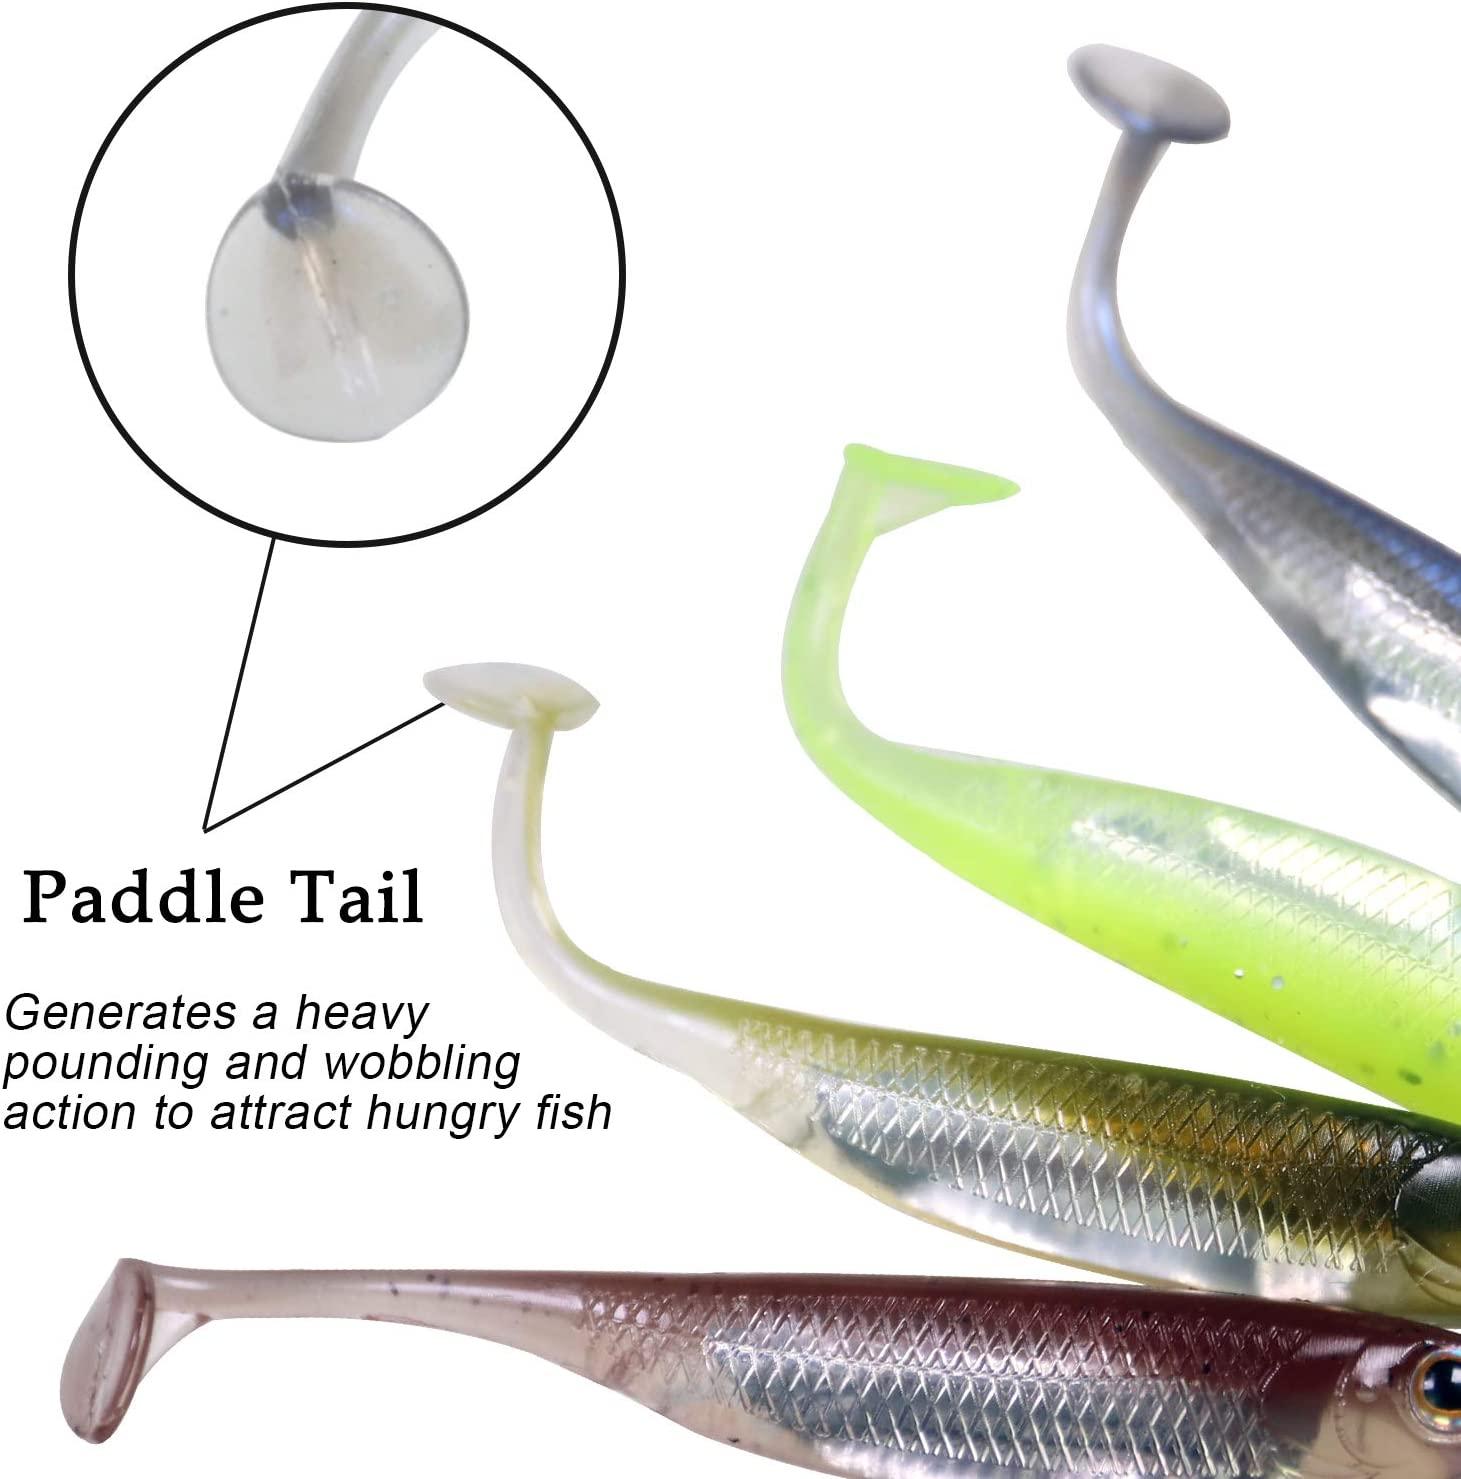 QualyQualy Soft Plastic Swimbait Paddle Tail Shad Lure Soft Bass Shad Bait  Shad Minnow Paddle Tail Swim Bait for Bass Trout Walleye Crappie 2.75in  3.14in 3.94in 5in 1# 3.14in - 6Pcs